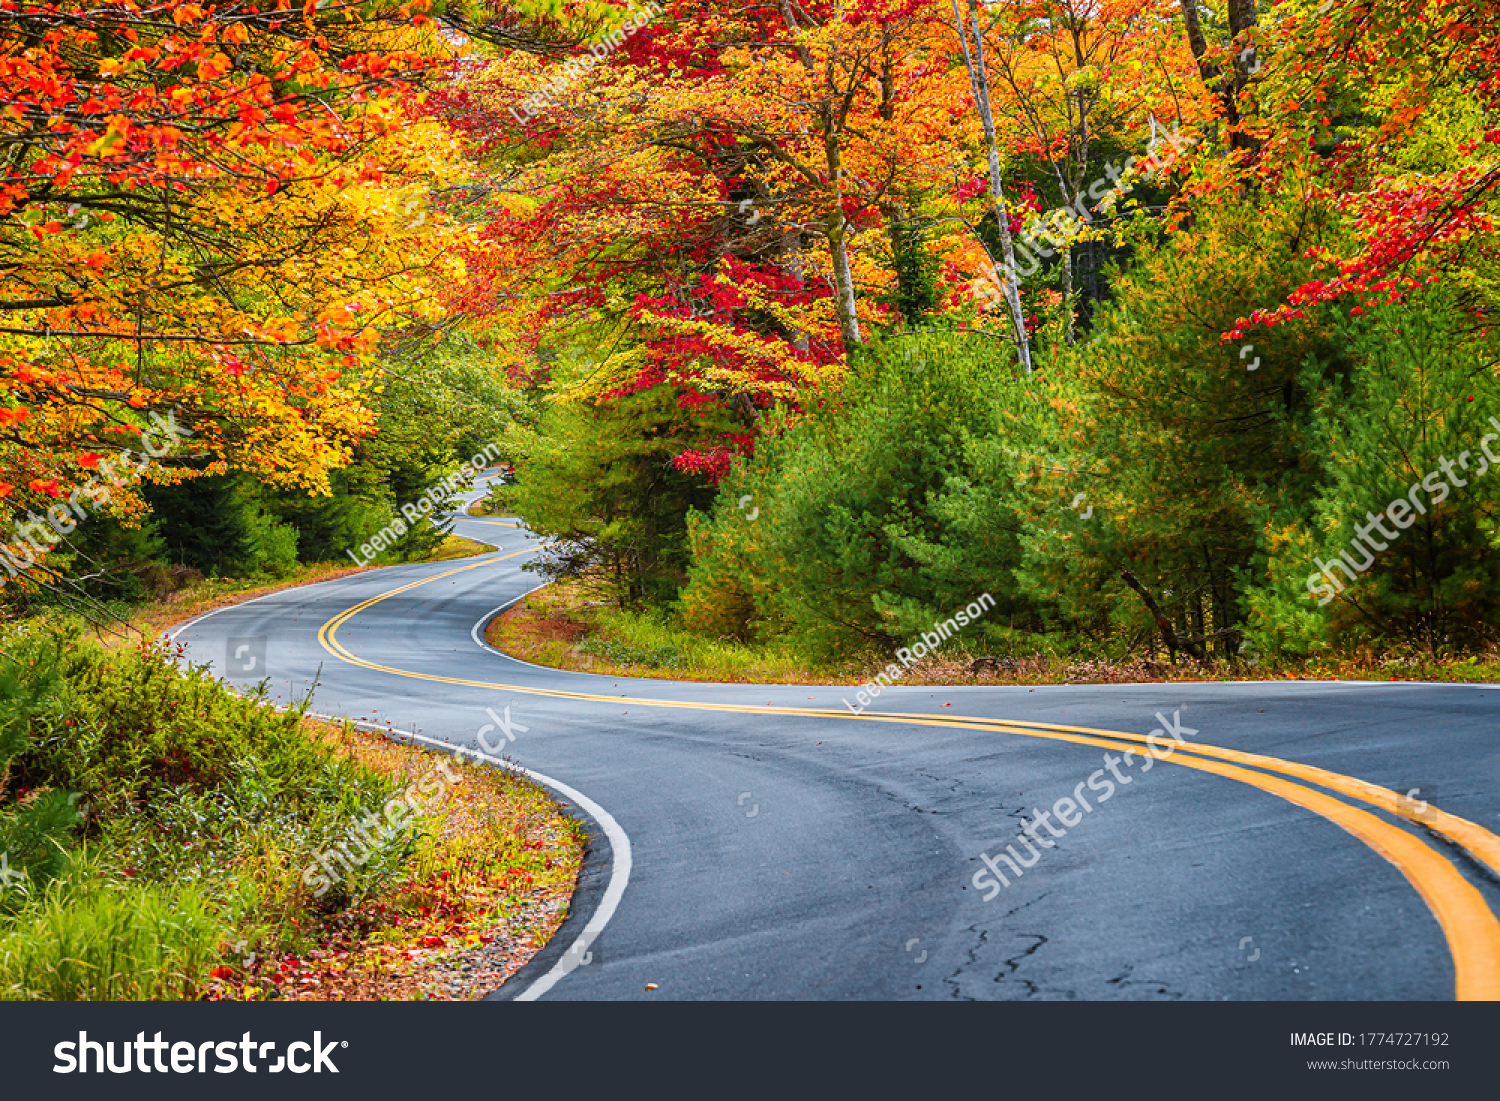 Winding road curves through scenic autumn foliage trees in New England. #1774727192